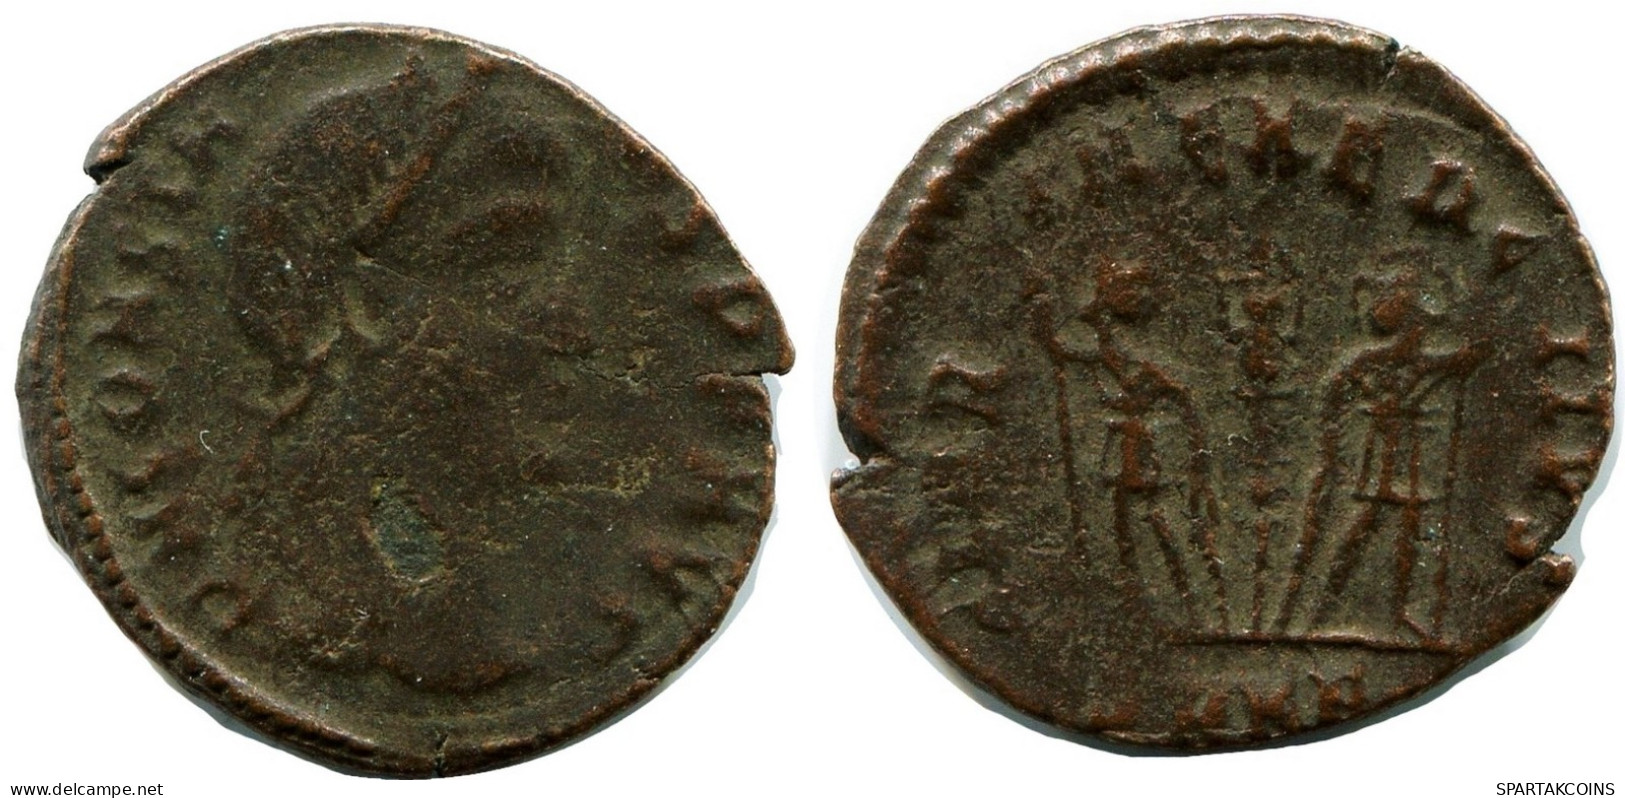 CONSTANS MINTED IN CYZICUS FROM THE ROYAL ONTARIO MUSEUM #ANC11676.14.U.A - L'Empire Chrétien (307 à 363)